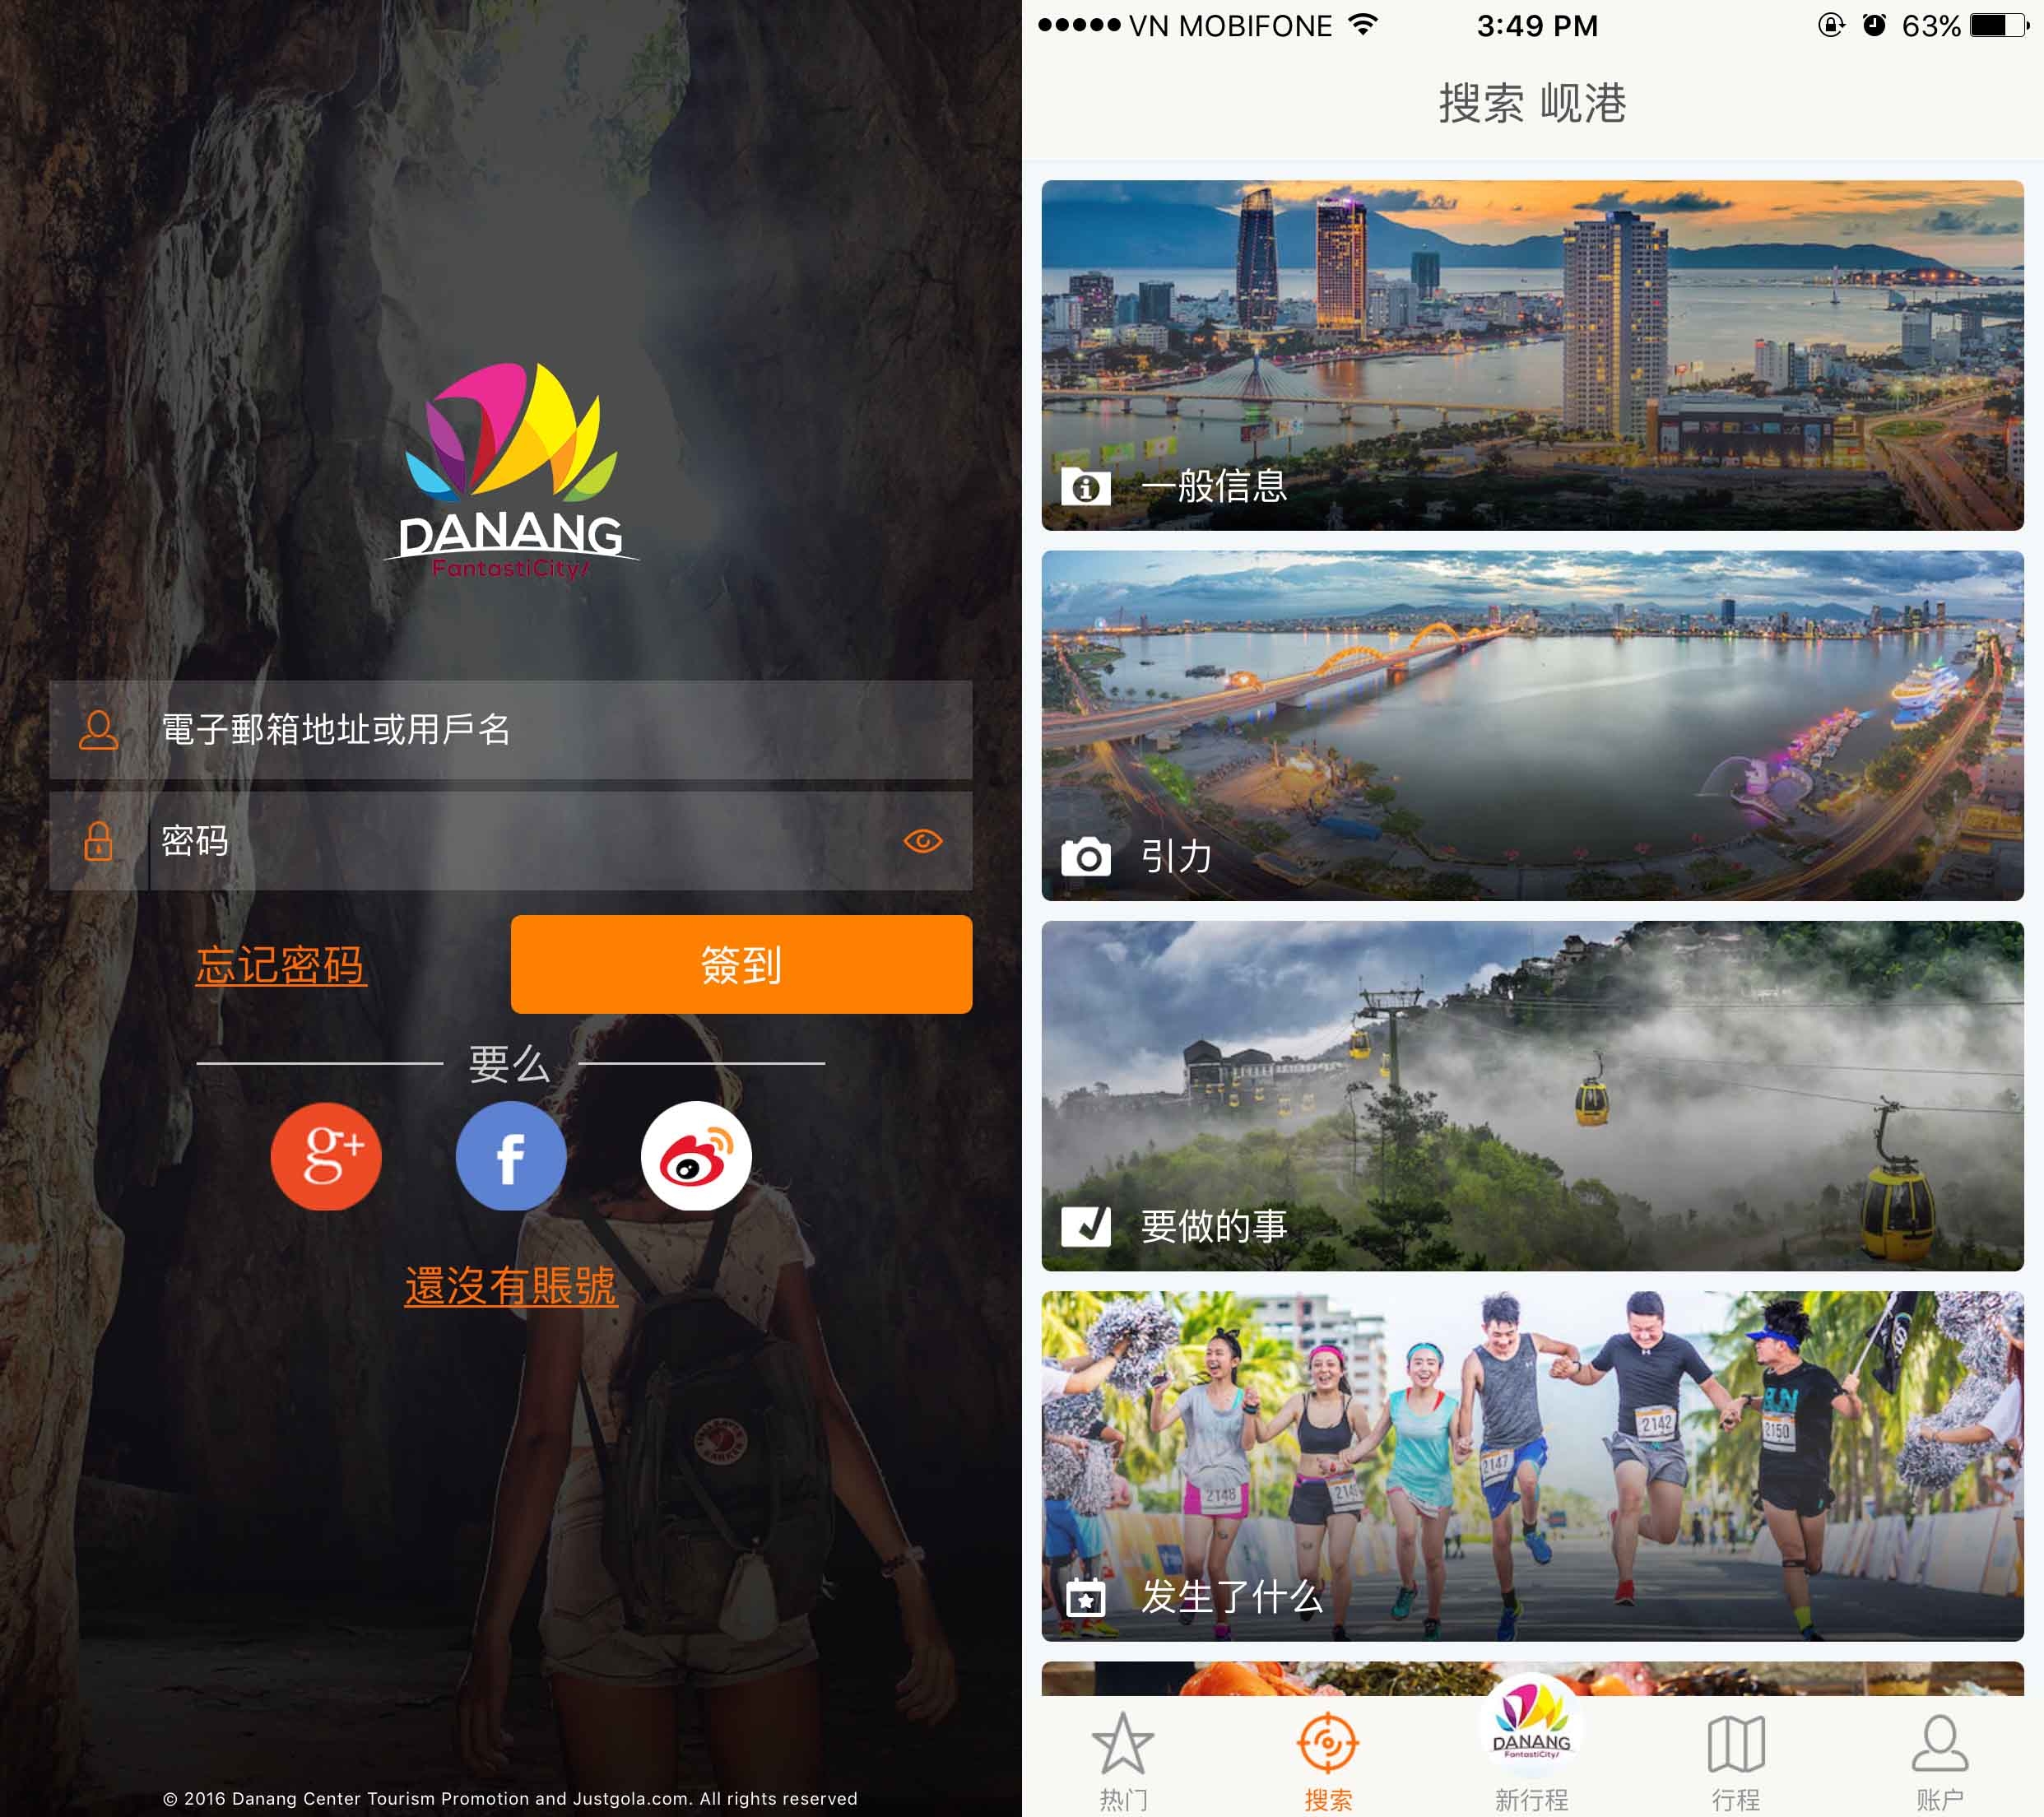 New version of Danang tourist app released – Danang FantastiCity Ver 2.0 “Check out Da Nang on your mobile devices!”2